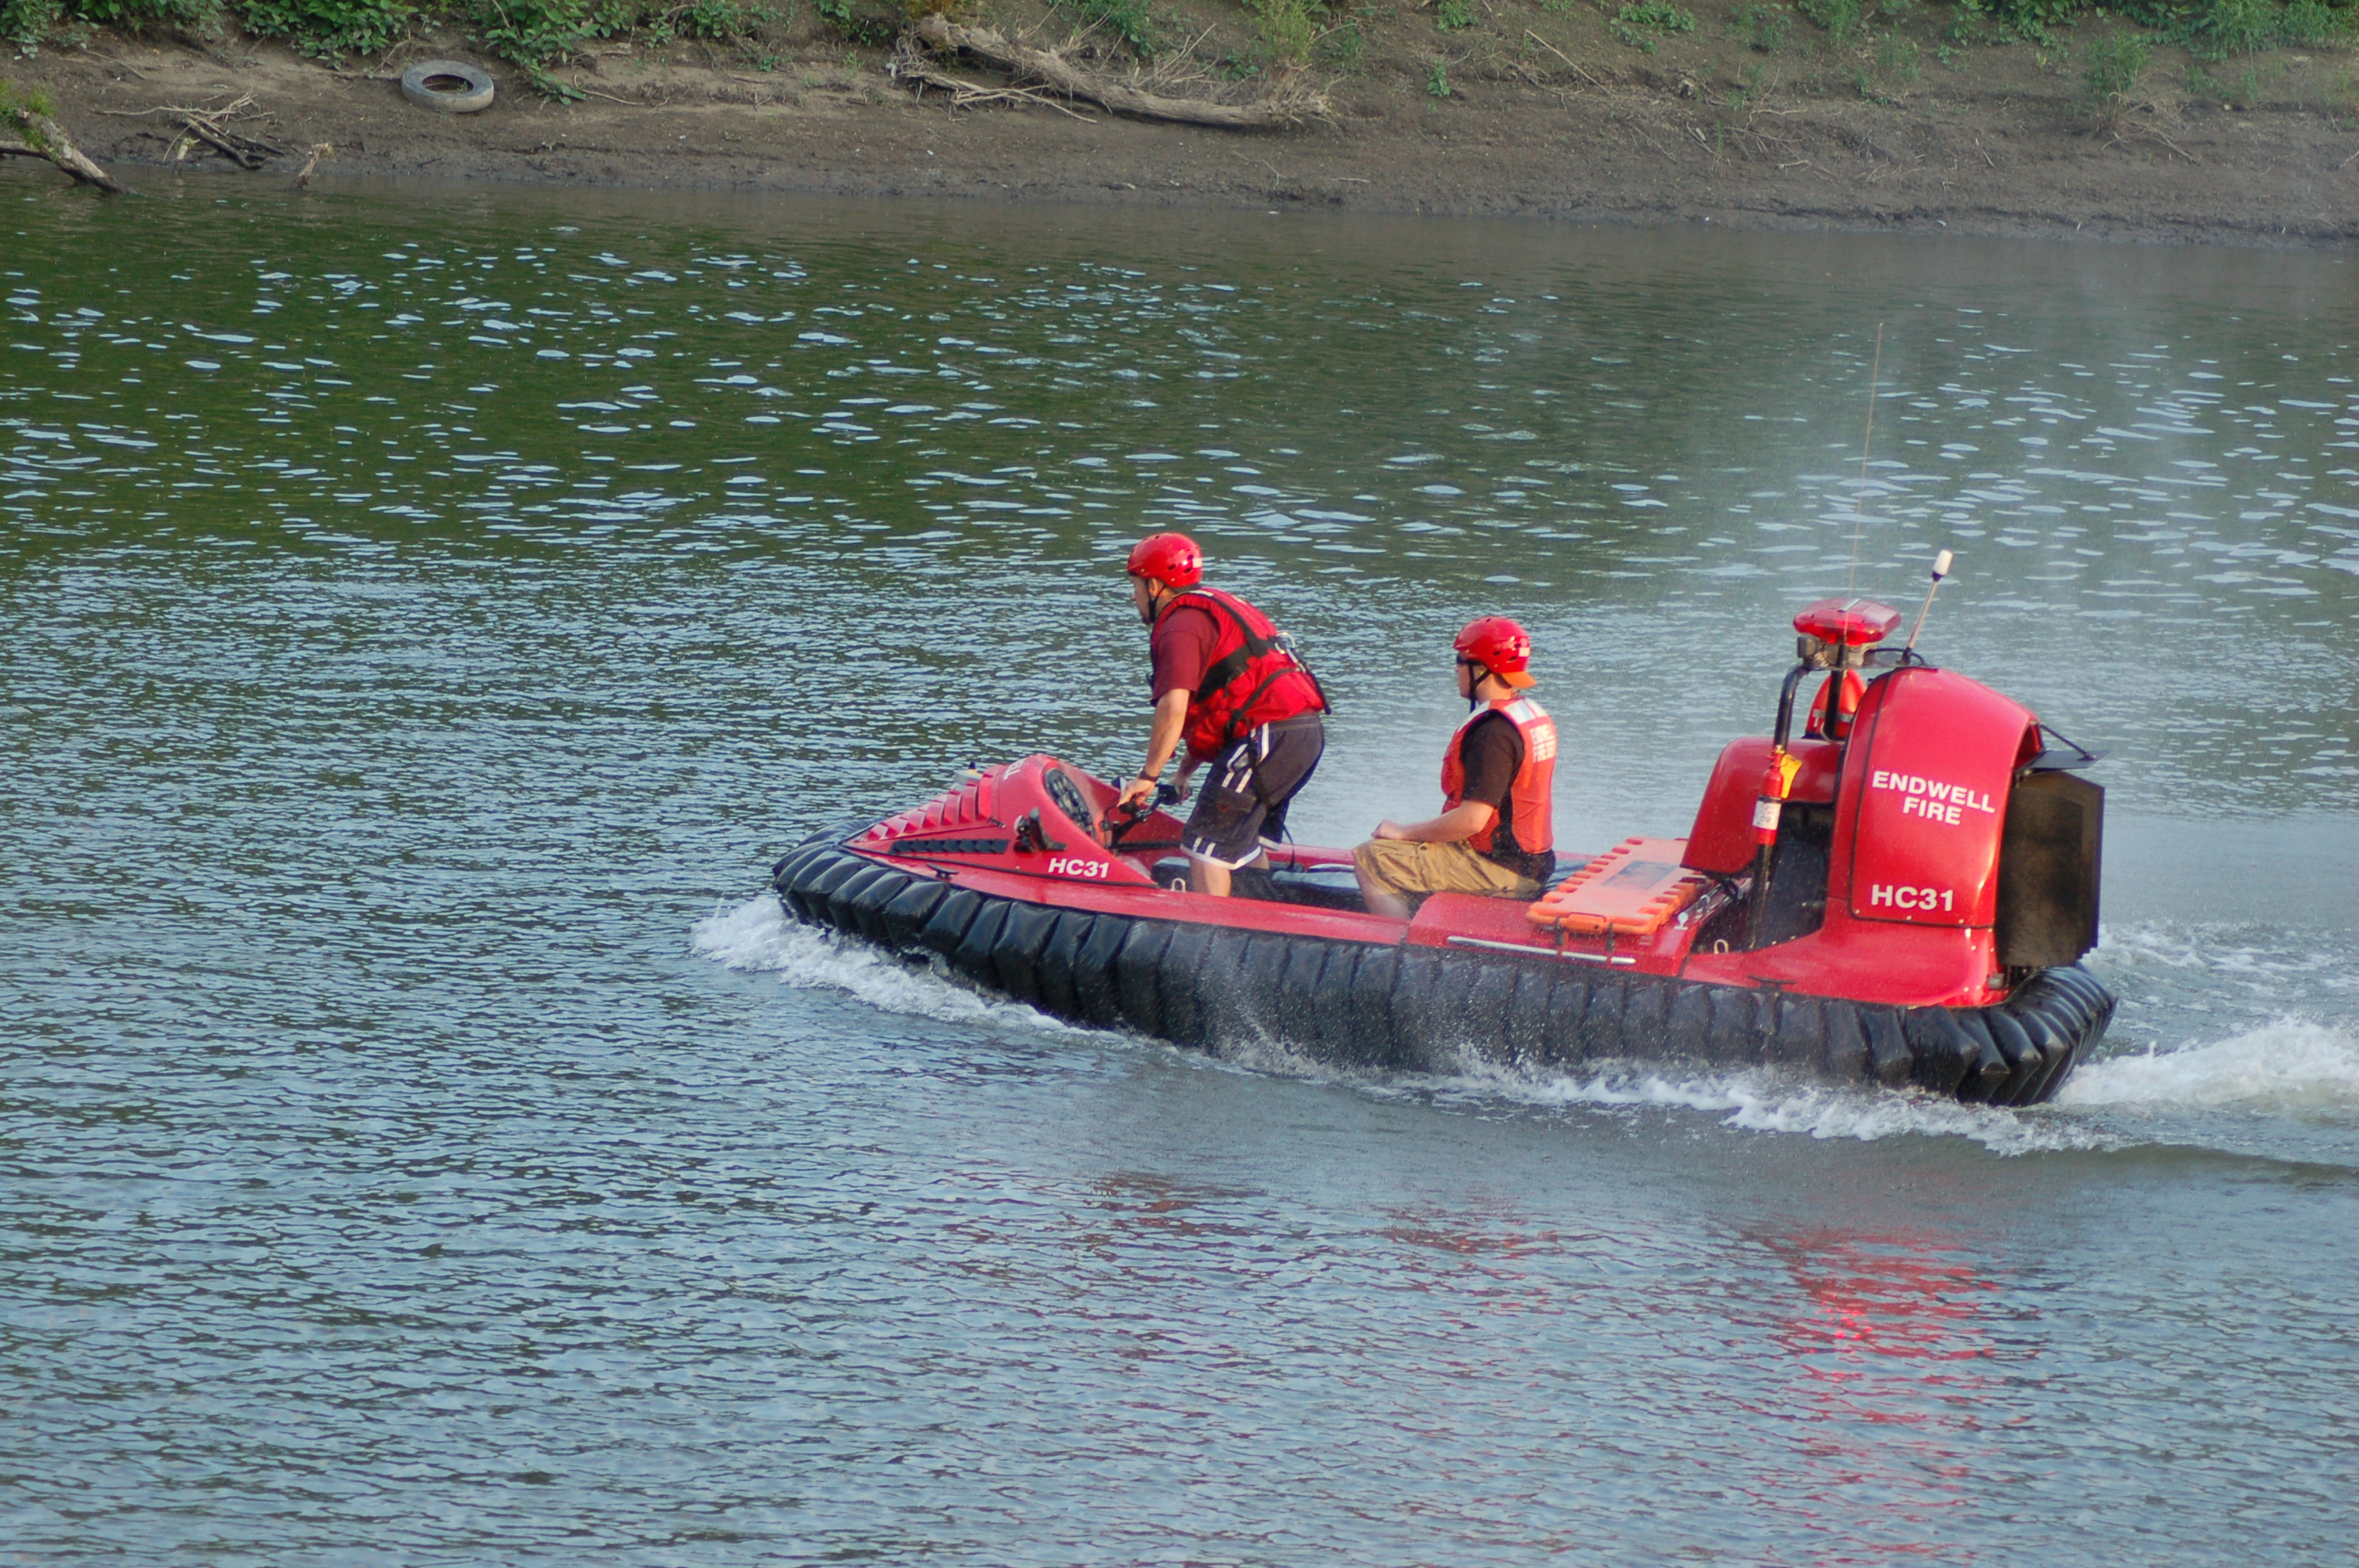 06-20-11  Training - Water Rescue